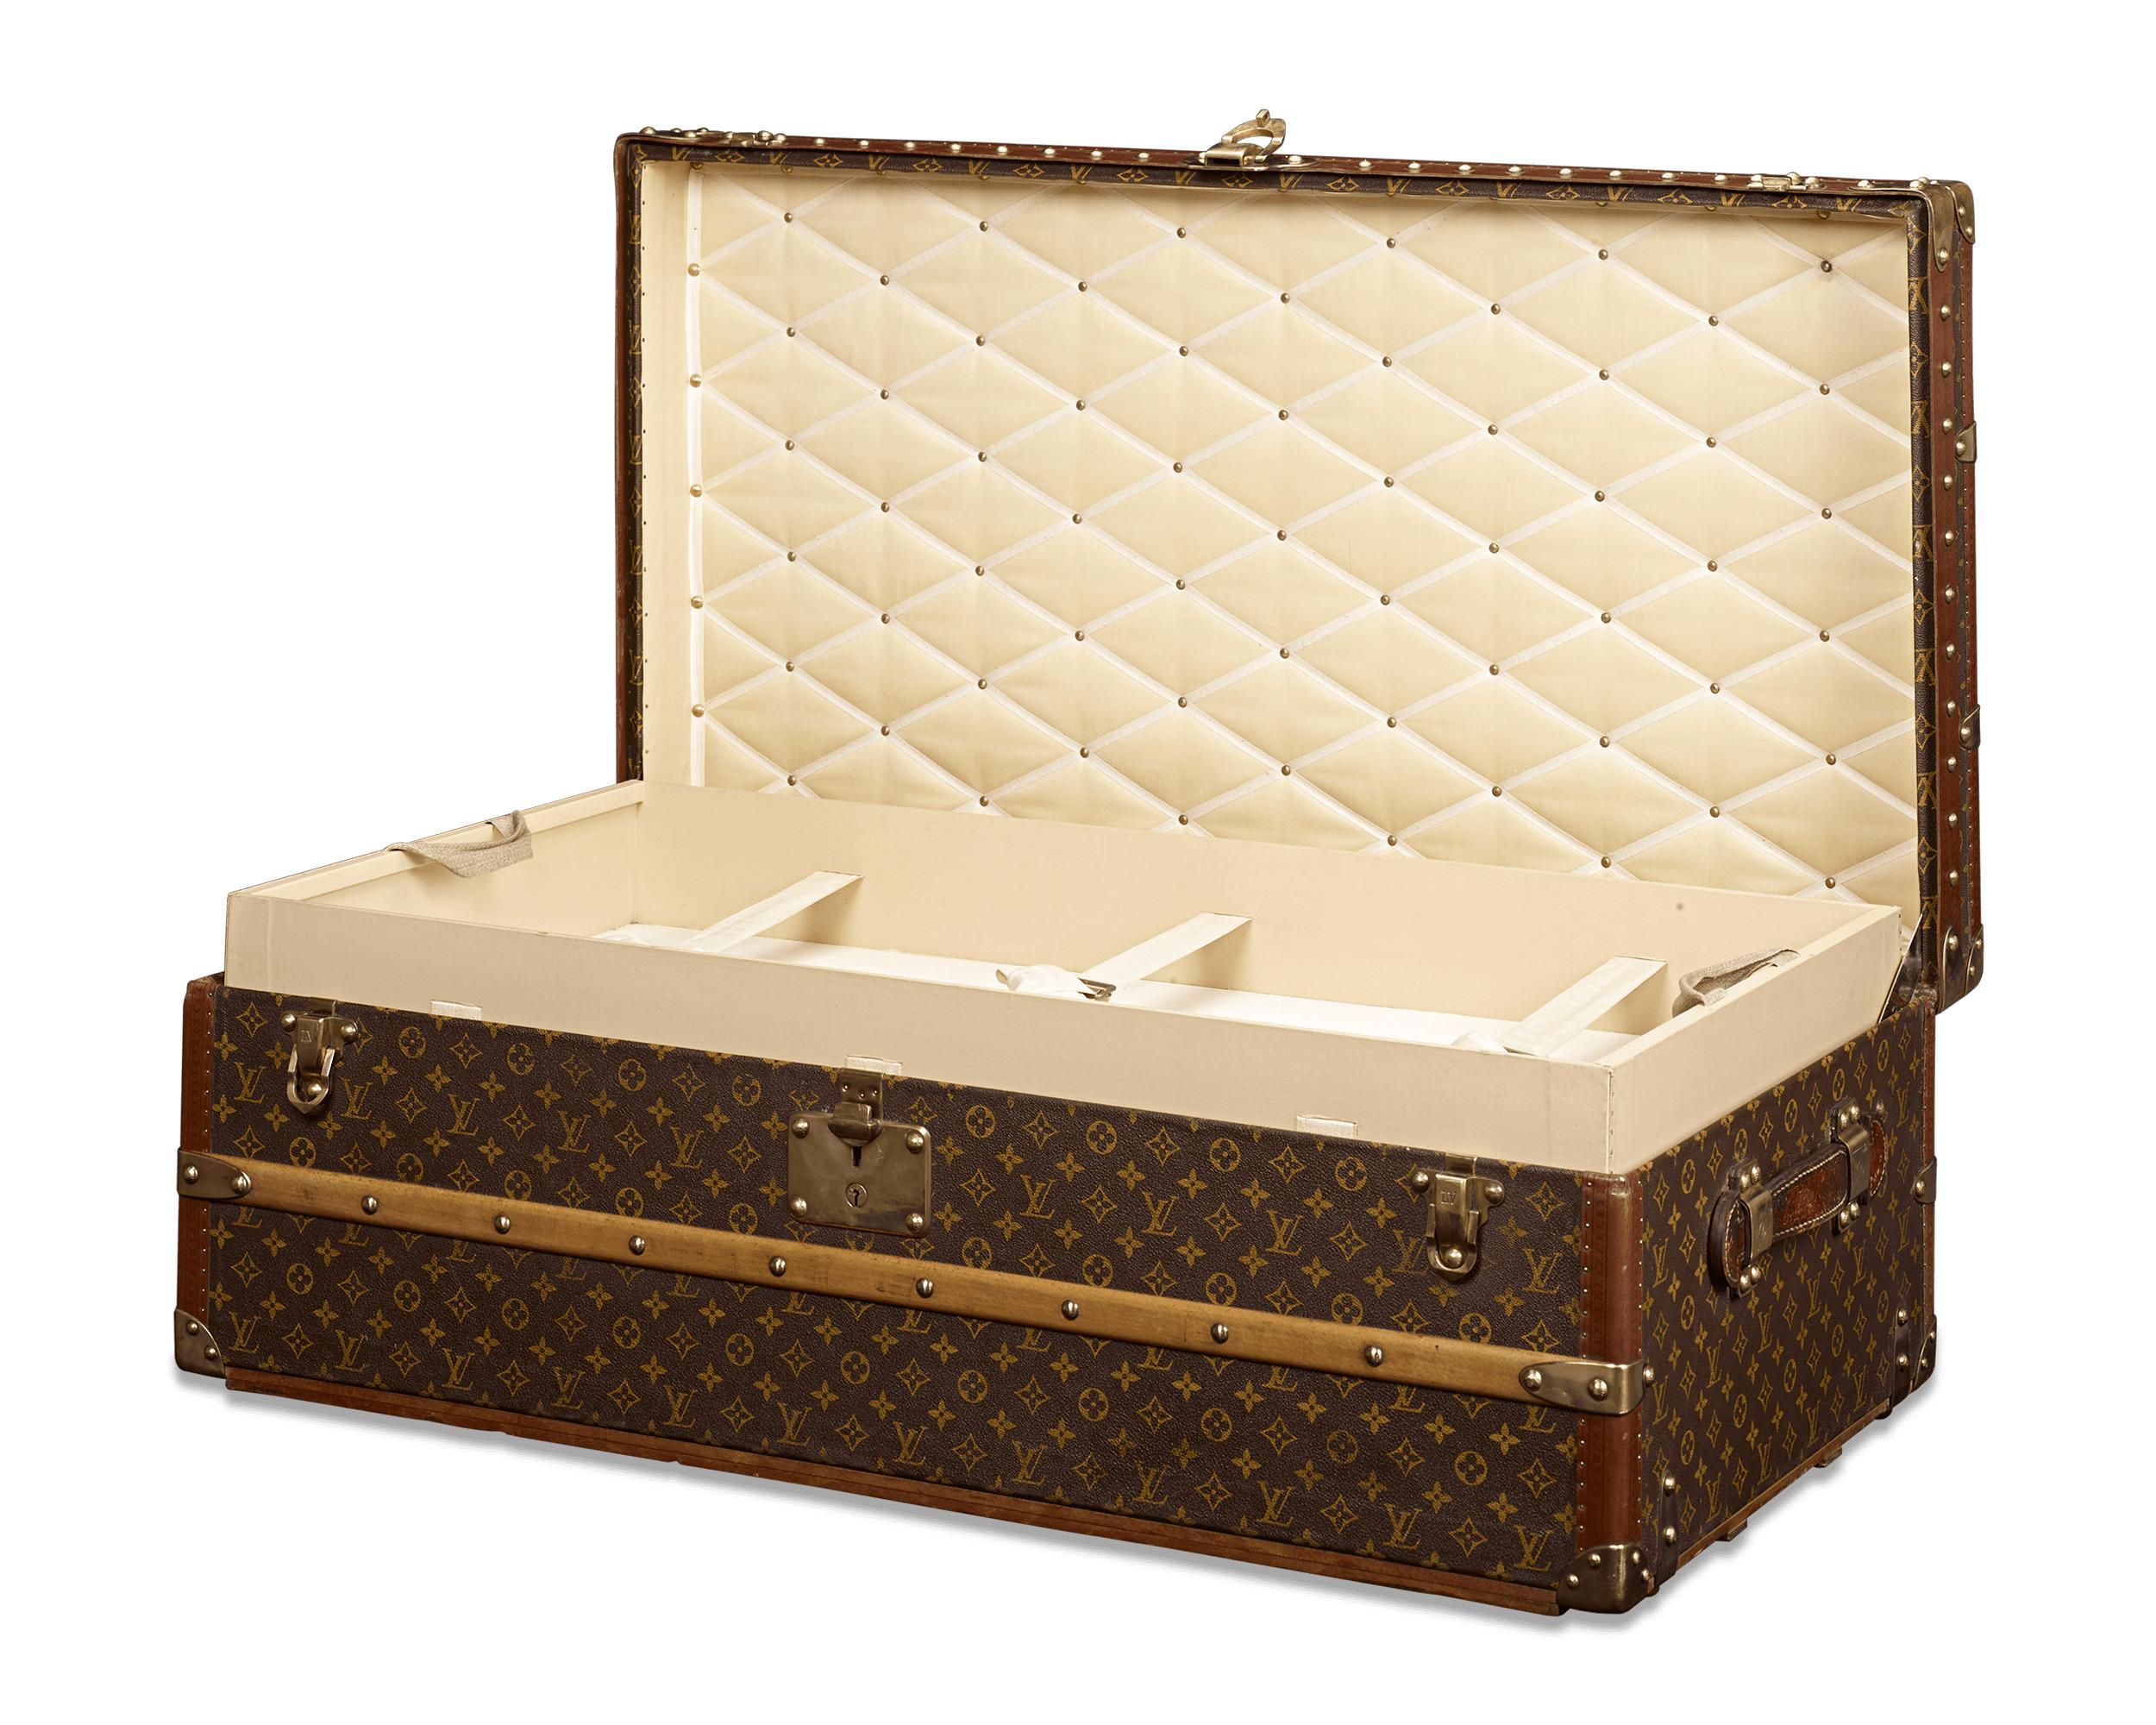 This rare and captivating antique Louis Vuitton wardrobe trunk embodies the elegance and sophistication of a bygone era. Boasting the iconic “LV” monogram on its leather-upholstered frame, this chest is designed for transporting wardrobe essentials